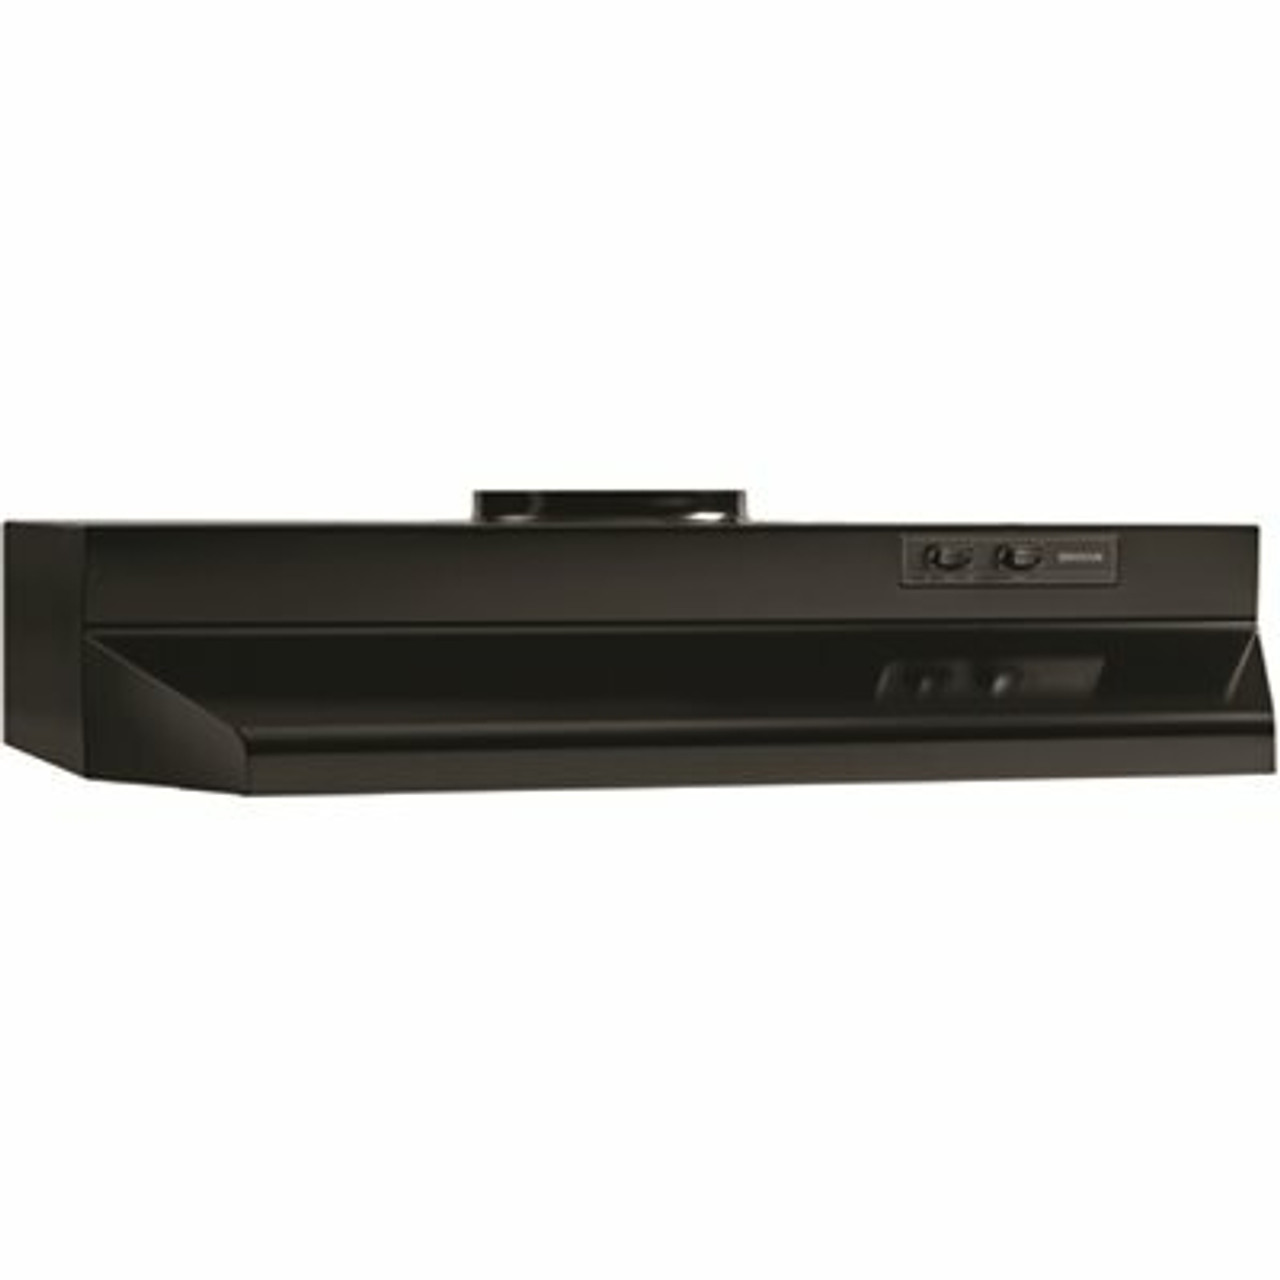 Broan-Nutone Buez2 30 In. 230 Max Blower Cfm Ducted Under-Cabinet Range Hood With Light And Easy Install System In Black